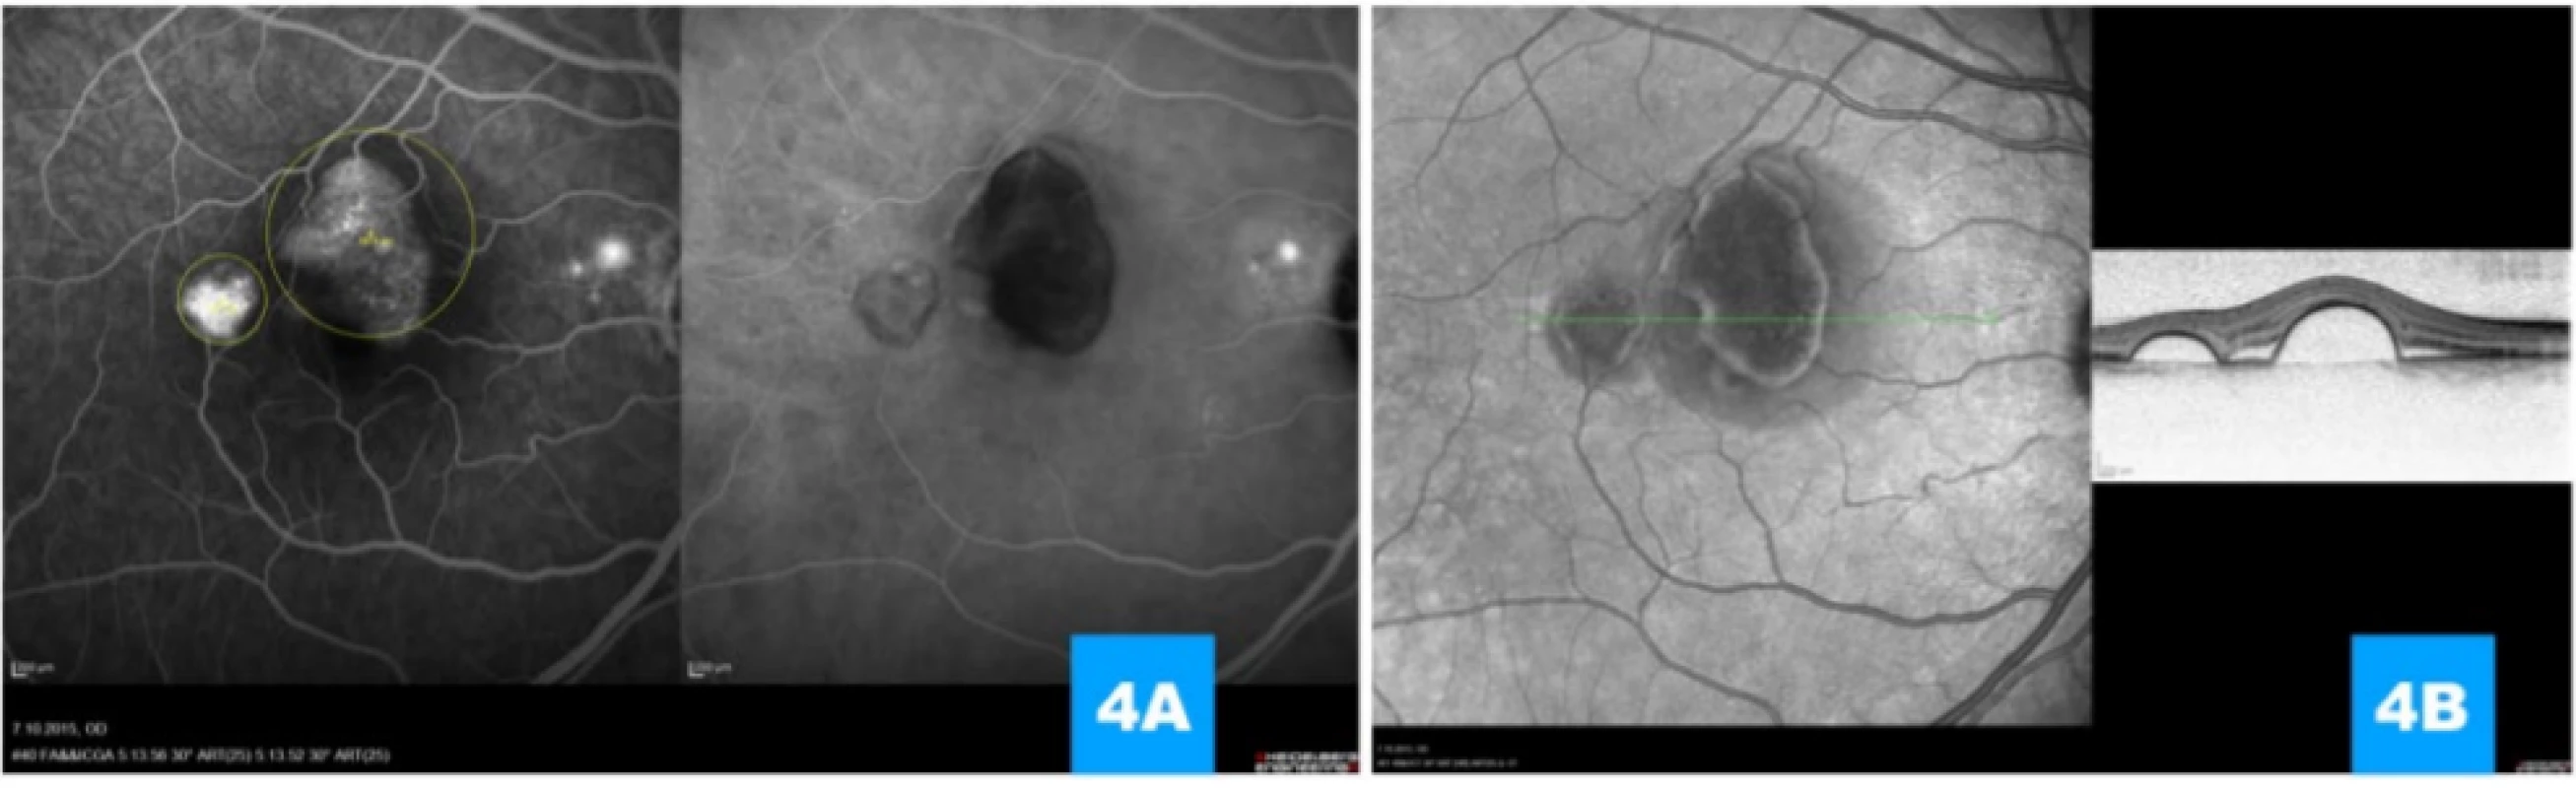  (A) Simultaneous image of fluorescence and indocyanine angiography illustrating late hyperfluorescence (pooling)
beneath ablations of the retinal pigment epithelium, minor deposit of hyperfluorescence in the parapapillary region, indication of size and location of beams for photodynamic therapy (yellow outlining); there is clear gradation of the filling of
the choroidea beneath serous ablations, at the same time the image excludes the presence of choroidal neovascularisation.